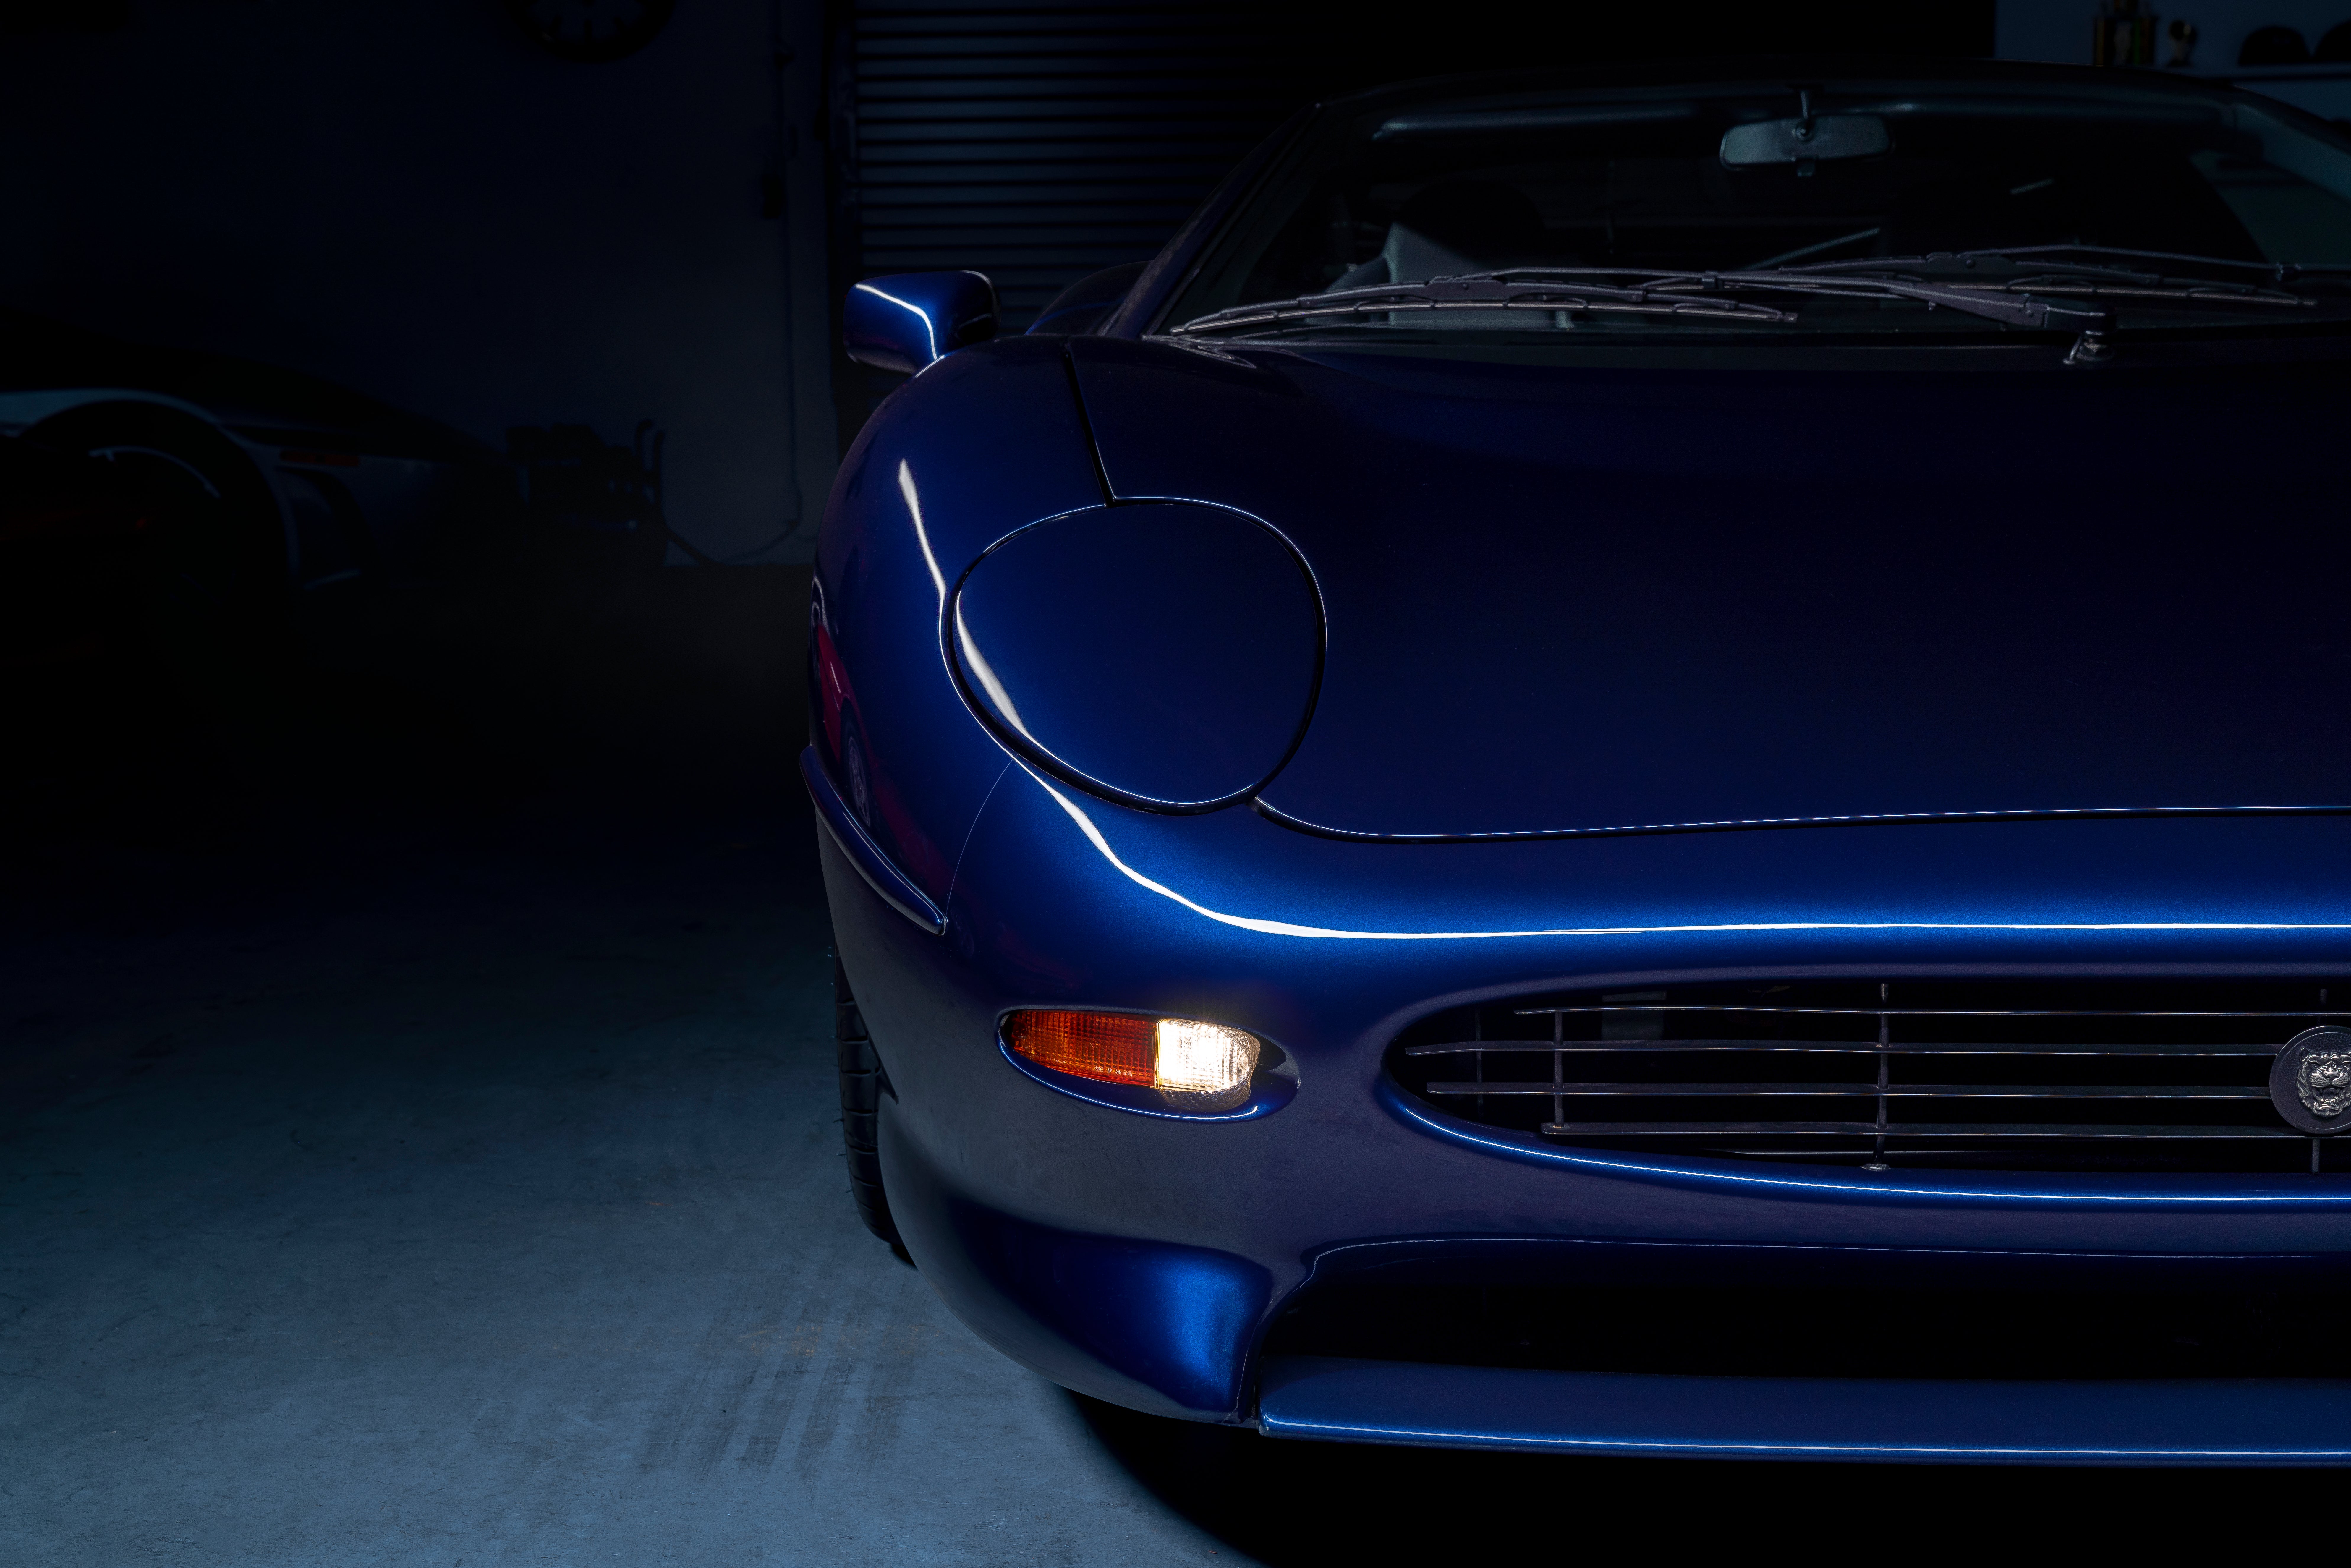 How to Use Light-Painting to Create Gorgeous Car Photography